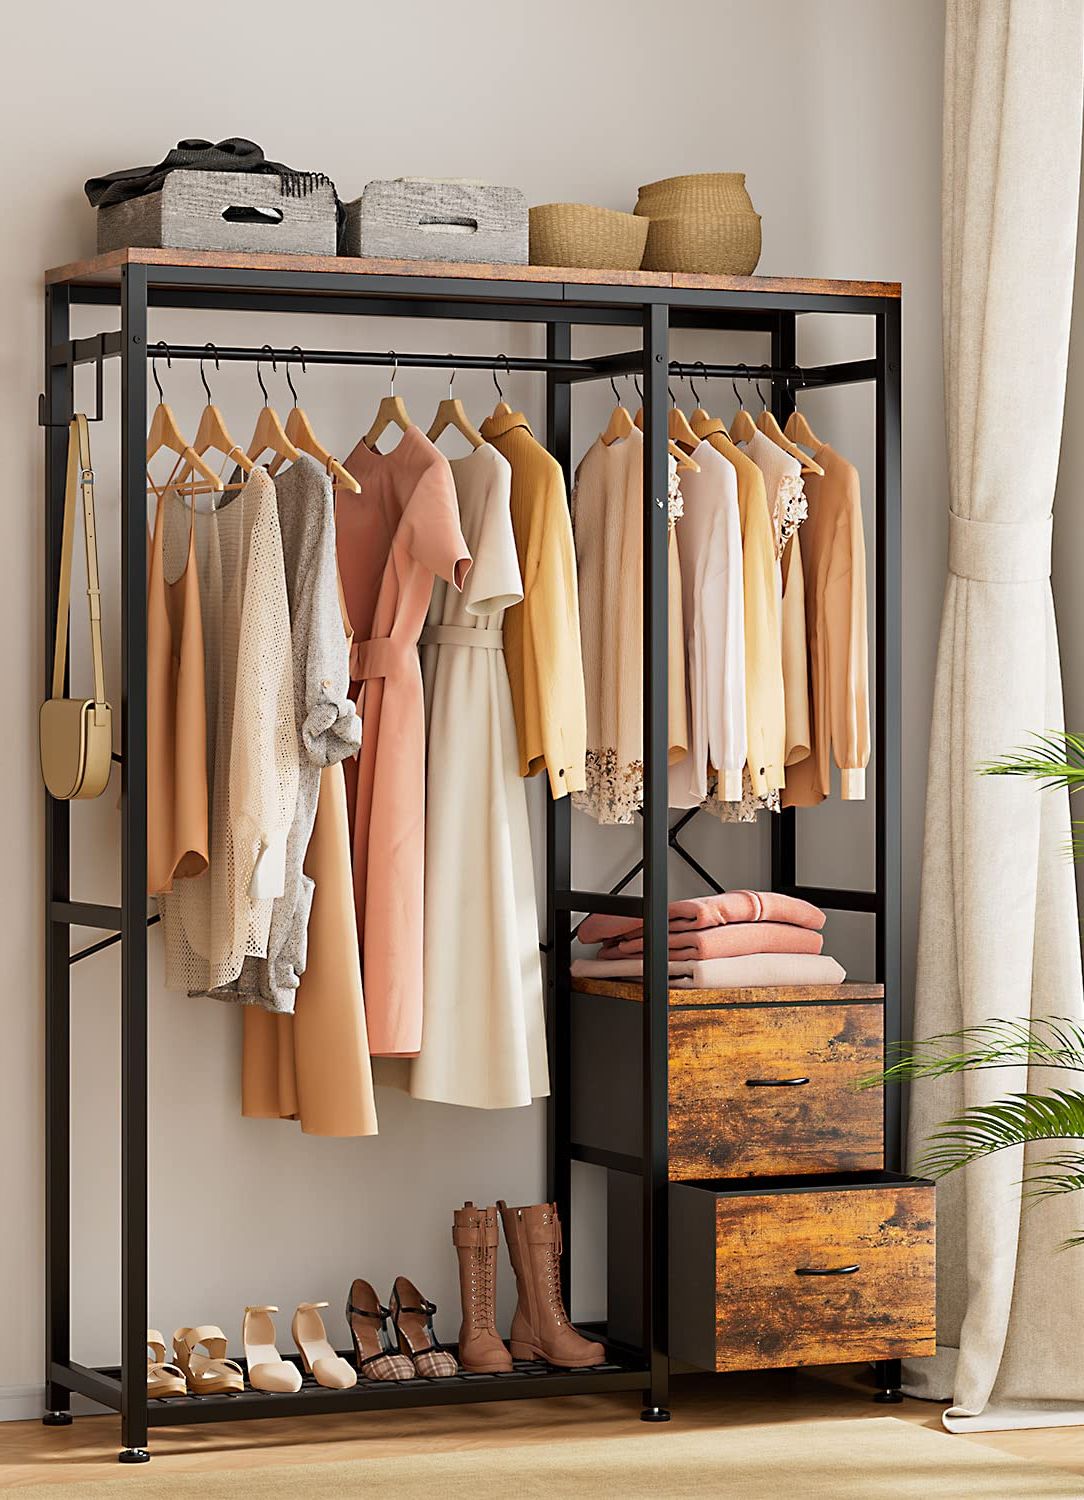 Amazon: Lulive Clothes Rack, Heavy Duty Garment Rack For Hanging Clothes,  Industrial Clothing Racks With Shelves, 2 Fabric Drawers, 4 Hooks, 2  Hanging Rods, Freestanding Closet Organizer, Rustic Brown : Home & Kitchen In Fashionable Wardrobes With Cover Clothes Rack (Photo 8 of 10)